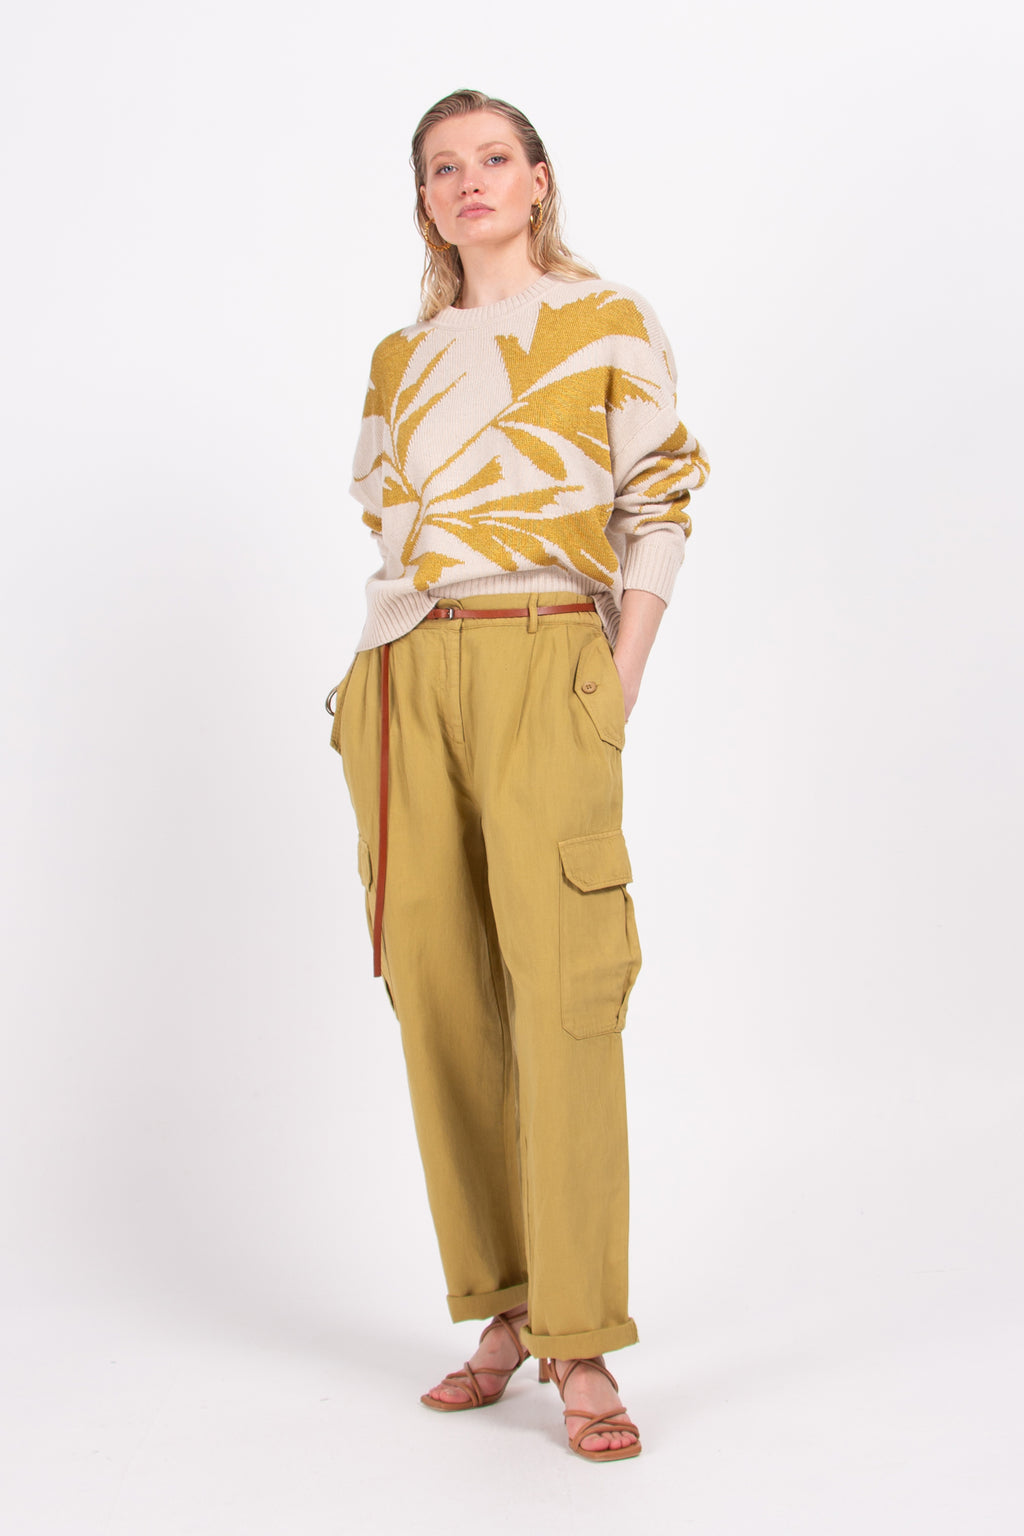 Mata knitted sweater with golden leaf